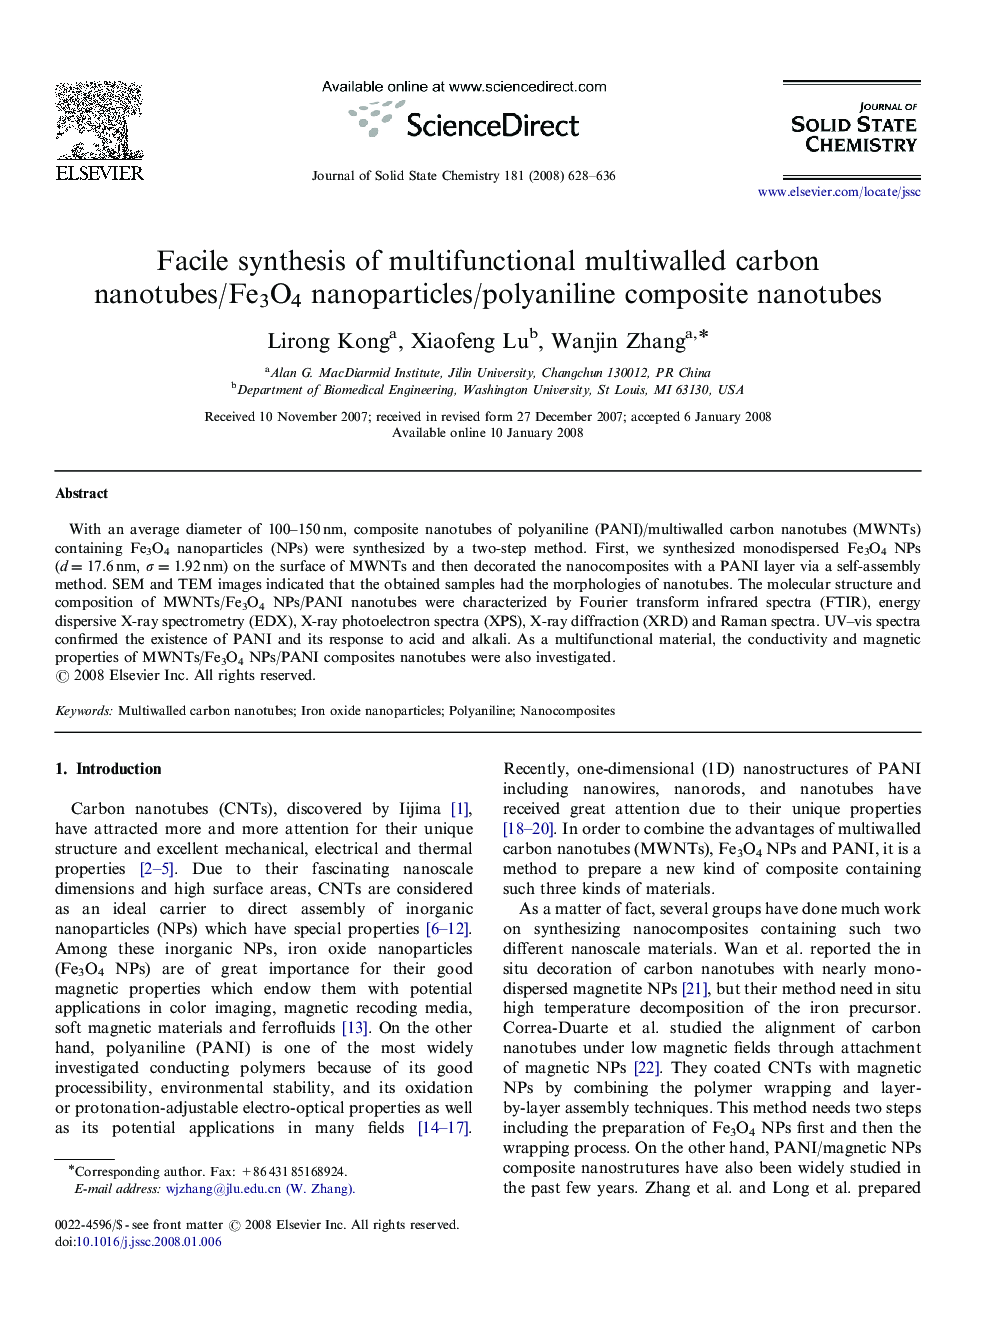 Facile synthesis of multifunctional multiwalled carbon nanotubes/Fe3O4 nanoparticles/polyaniline composite nanotubes